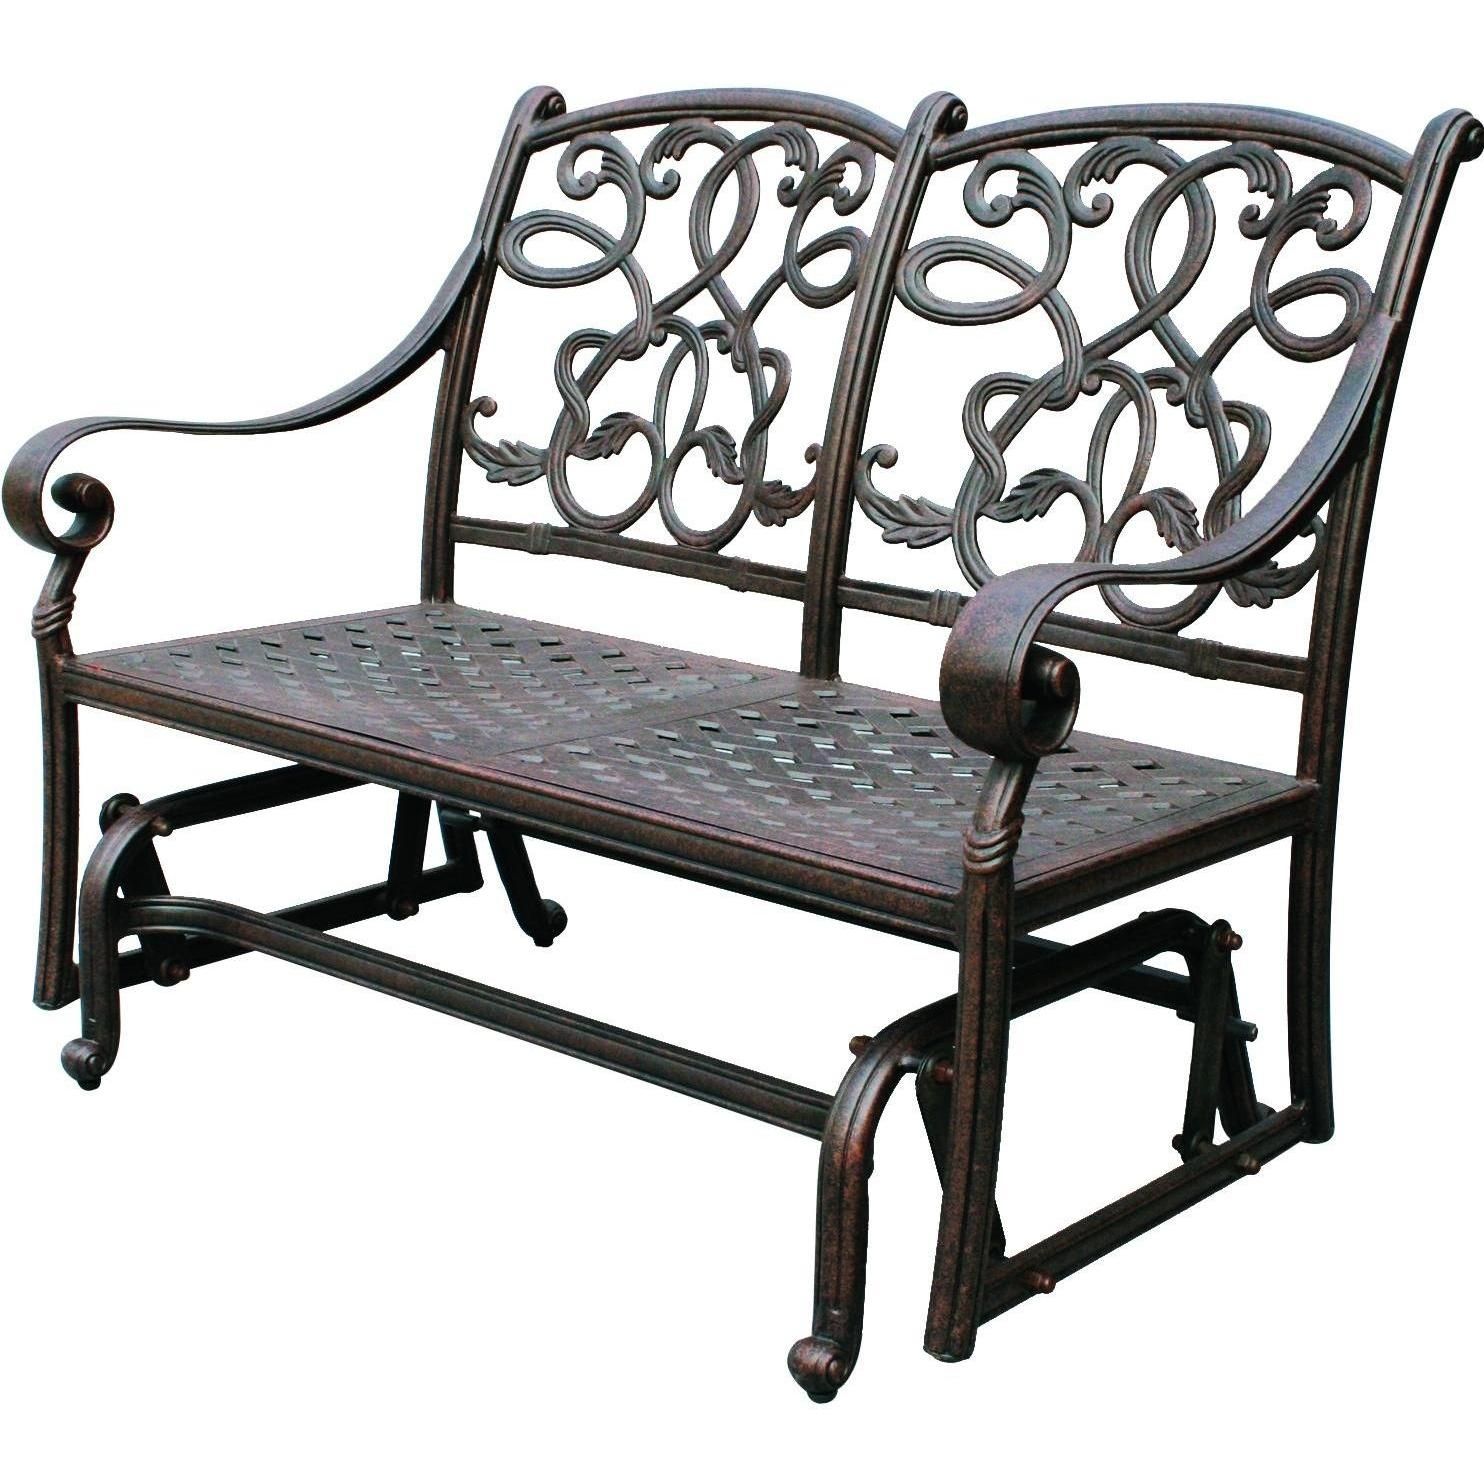 Darlee Santa Monica Cast Aluminum Patio Loveseat Glider Throughout 2 Person Antique Black Iron Outdoor Gliders (View 2 of 25)